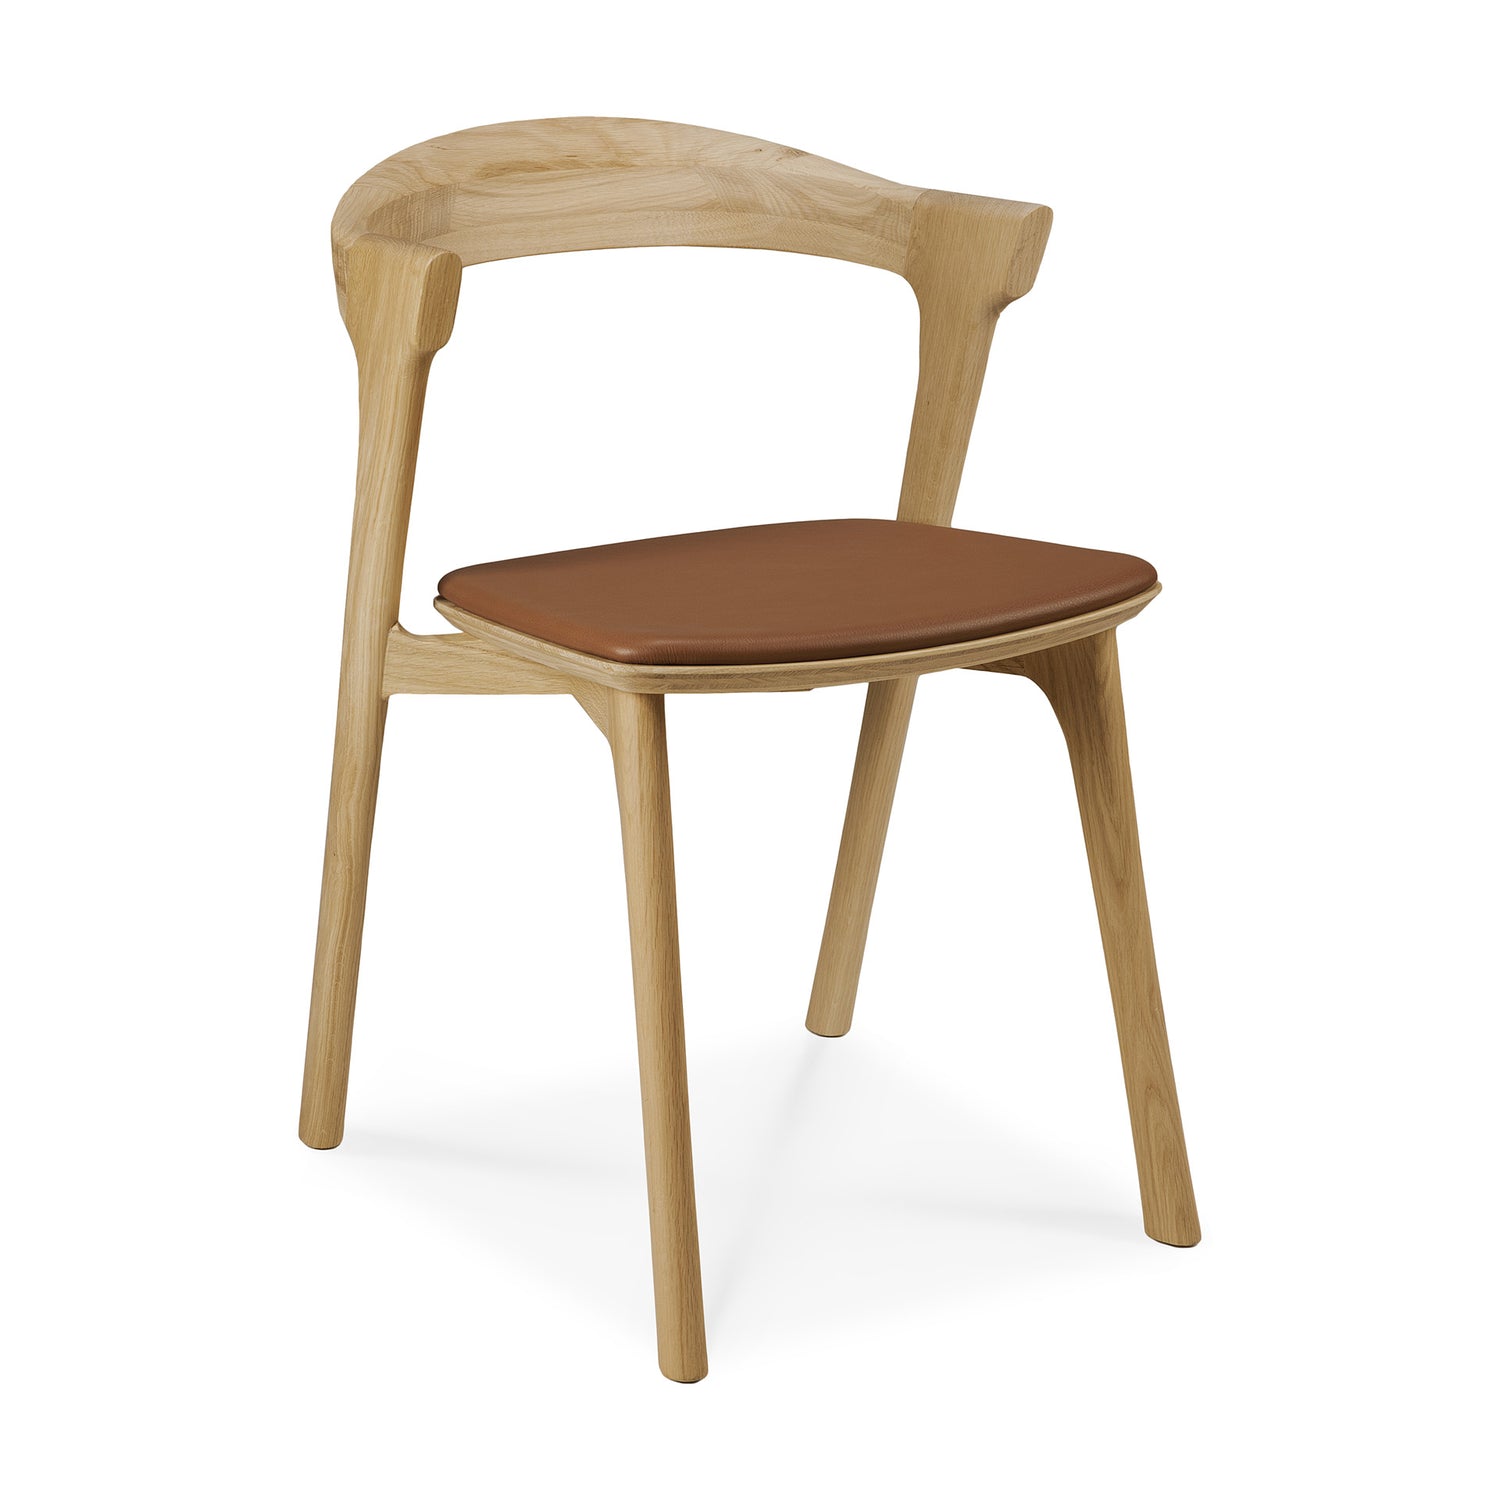 Bok Solid Oak Dining Chair, Varnished with Cognac Leather Cushion